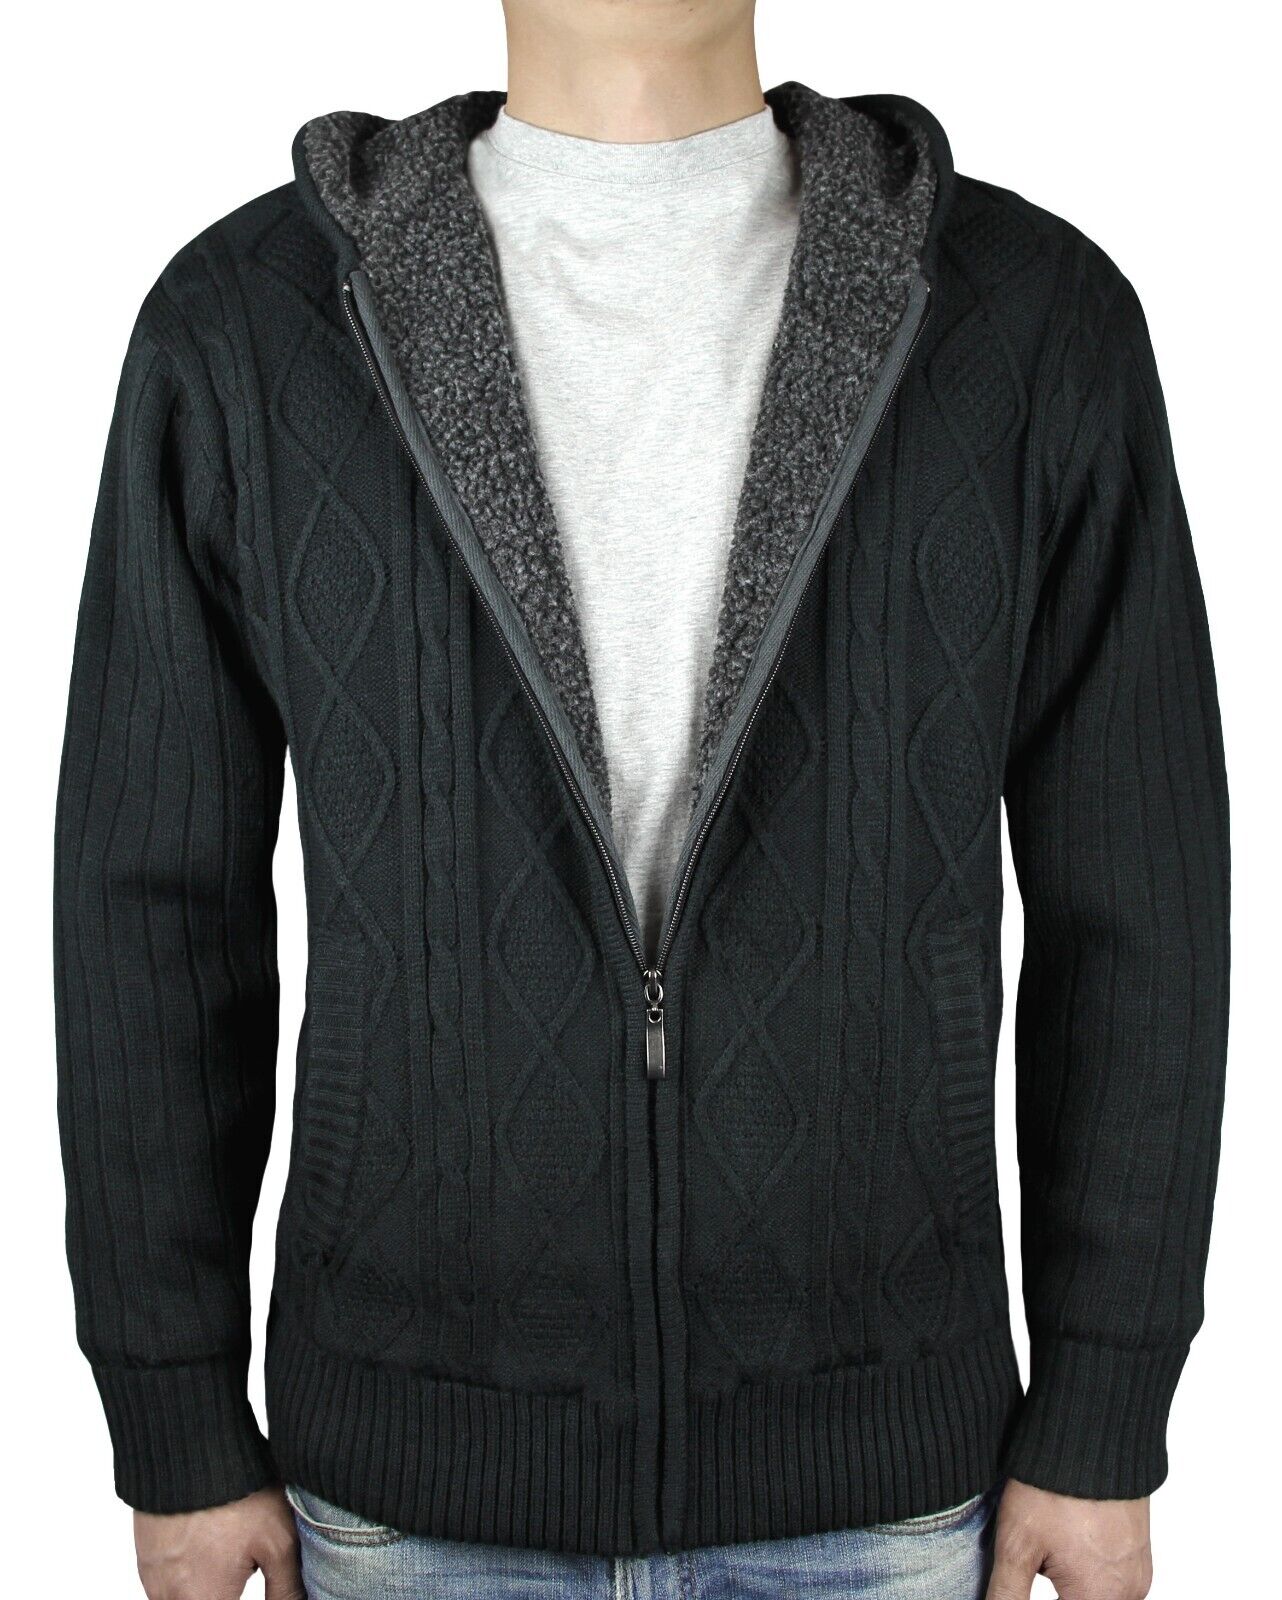 Blue Ocean Mens Cable Sweater Jacket w/Sherpa lining(sw-675)